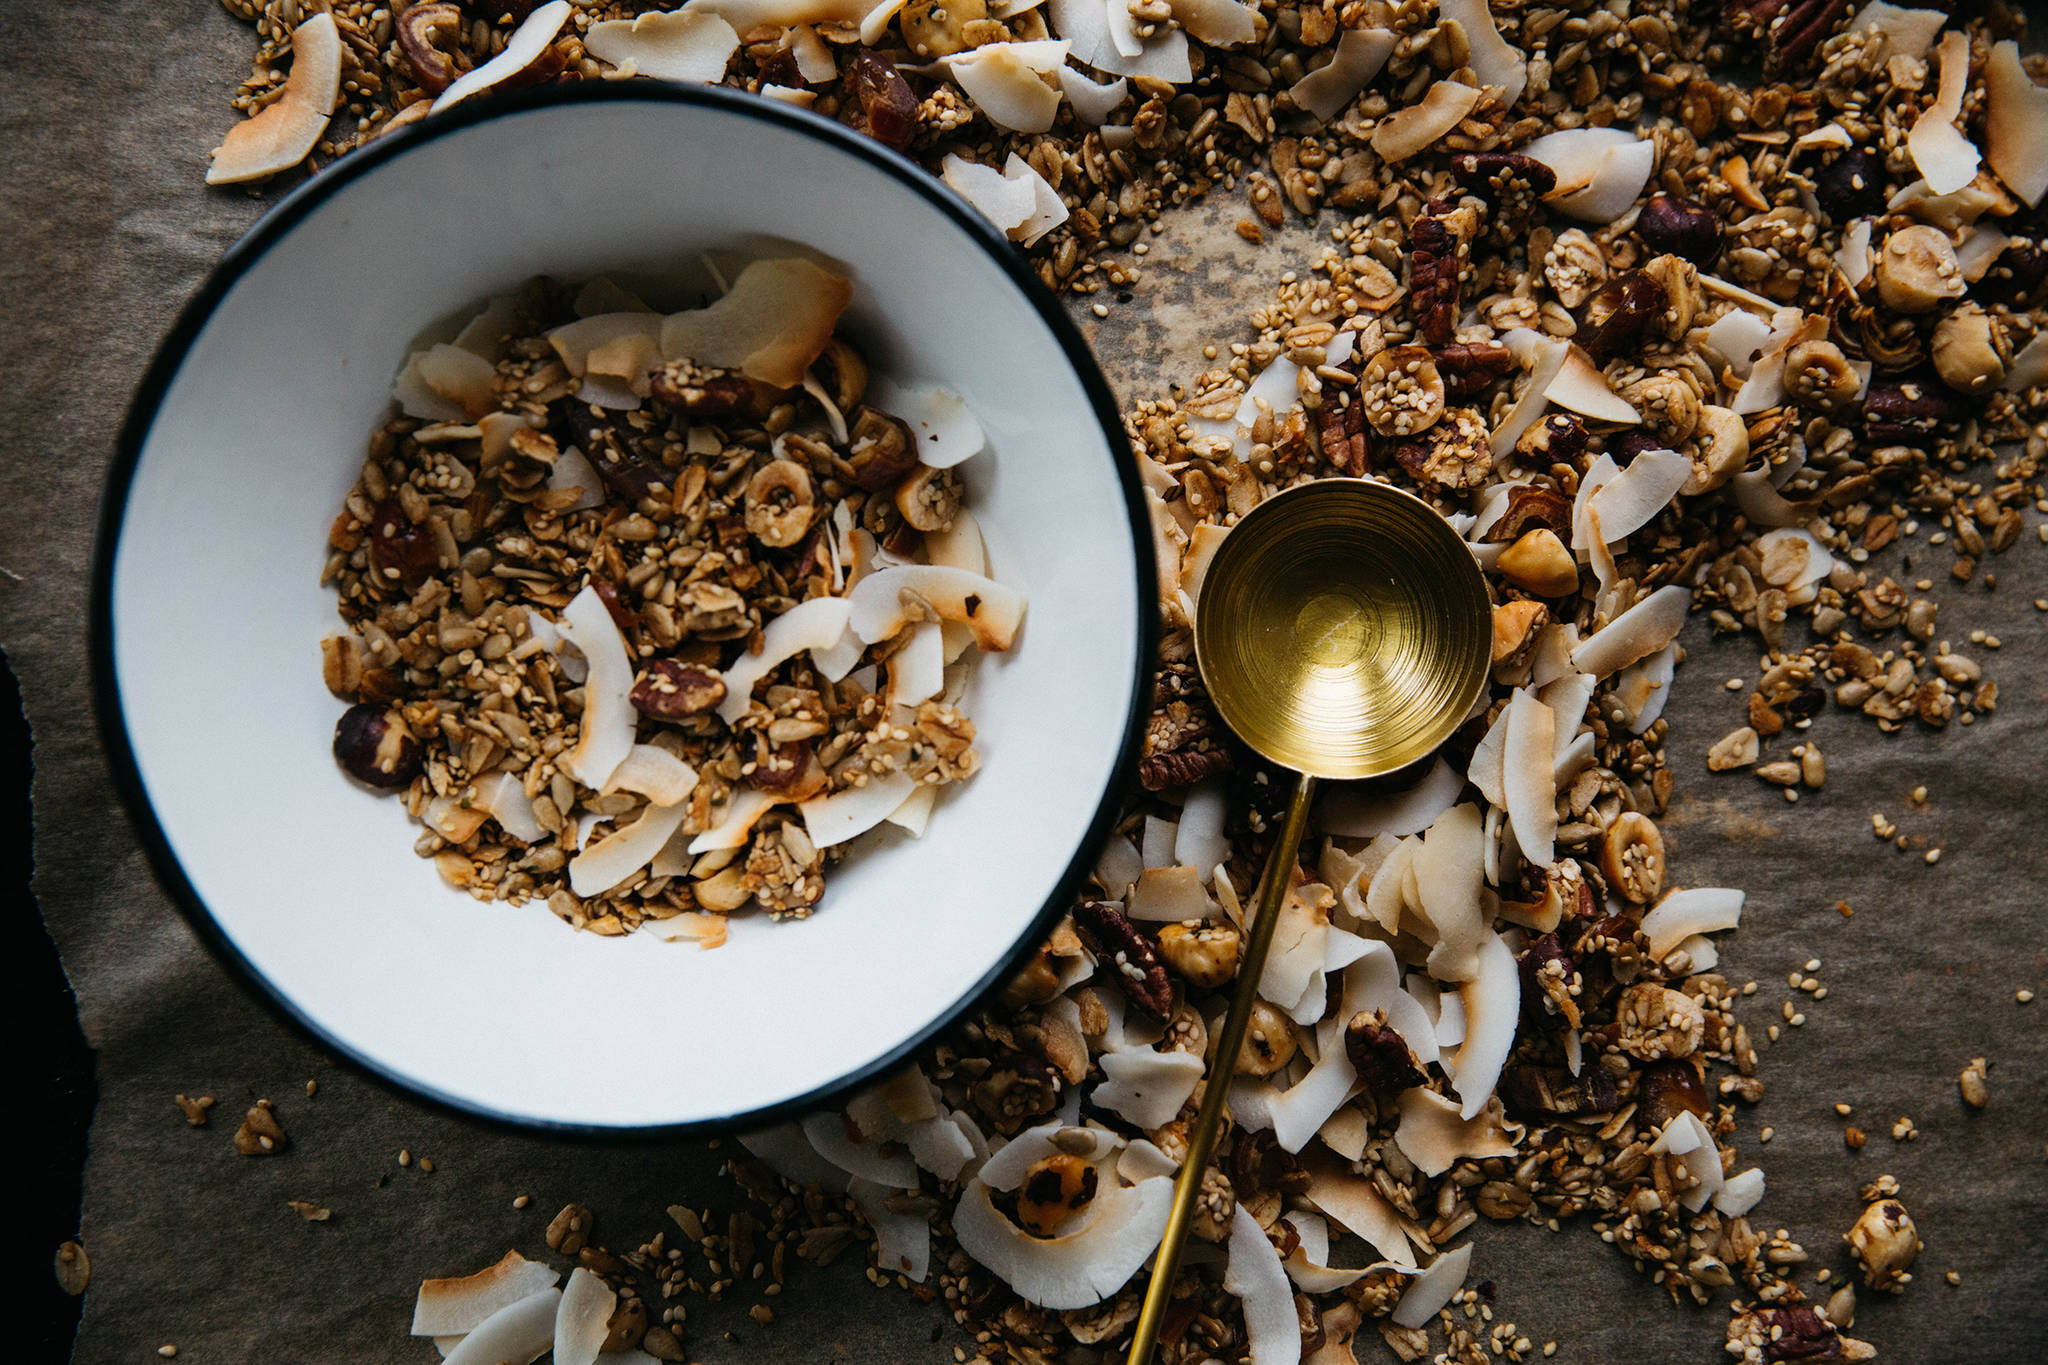 Love is making your own granola